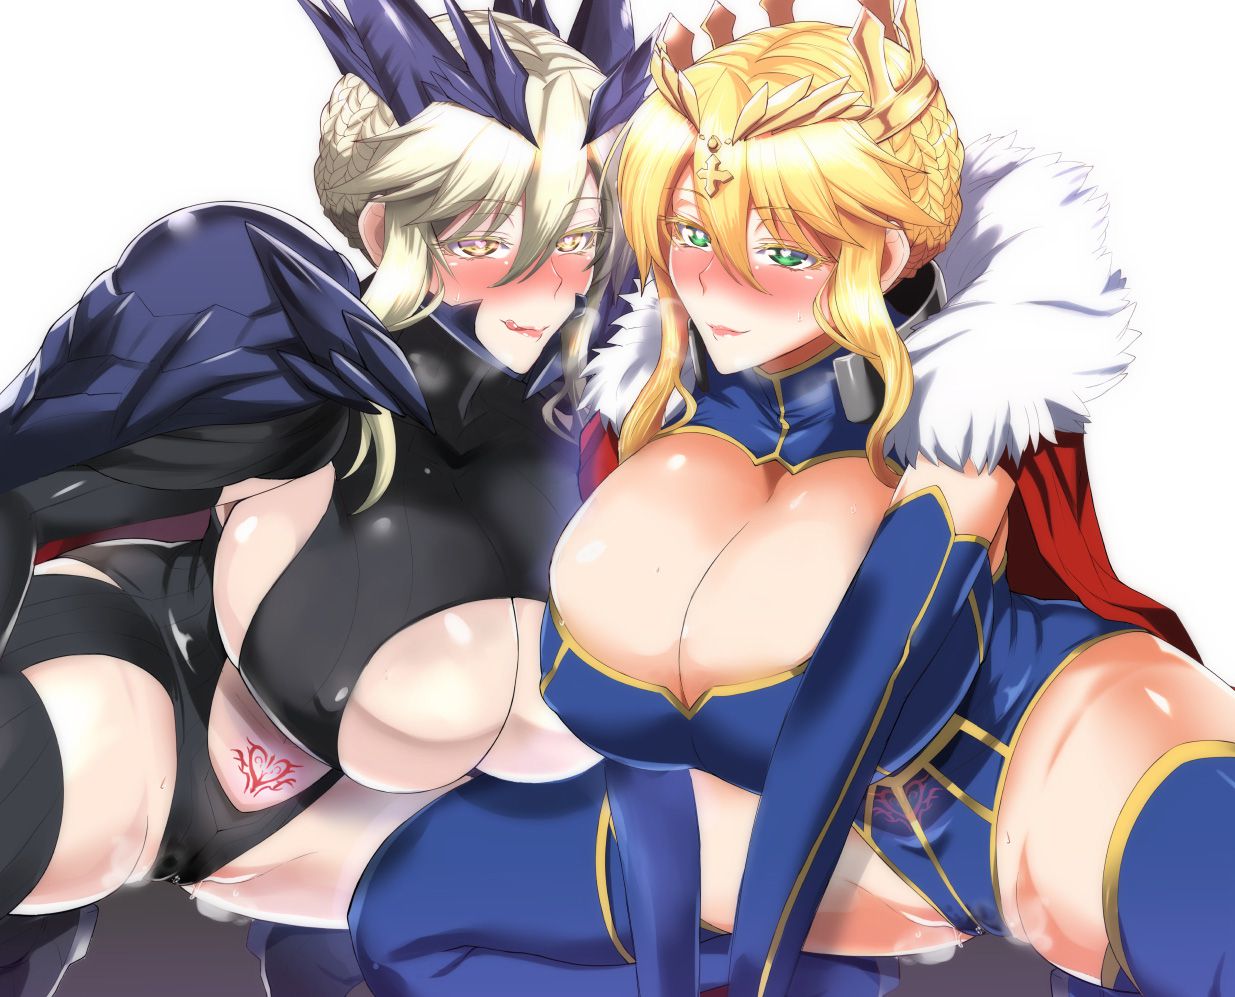 [Fate/GrandOrder (FGO)] secondary erotic images of female characters 3 60 photos 5